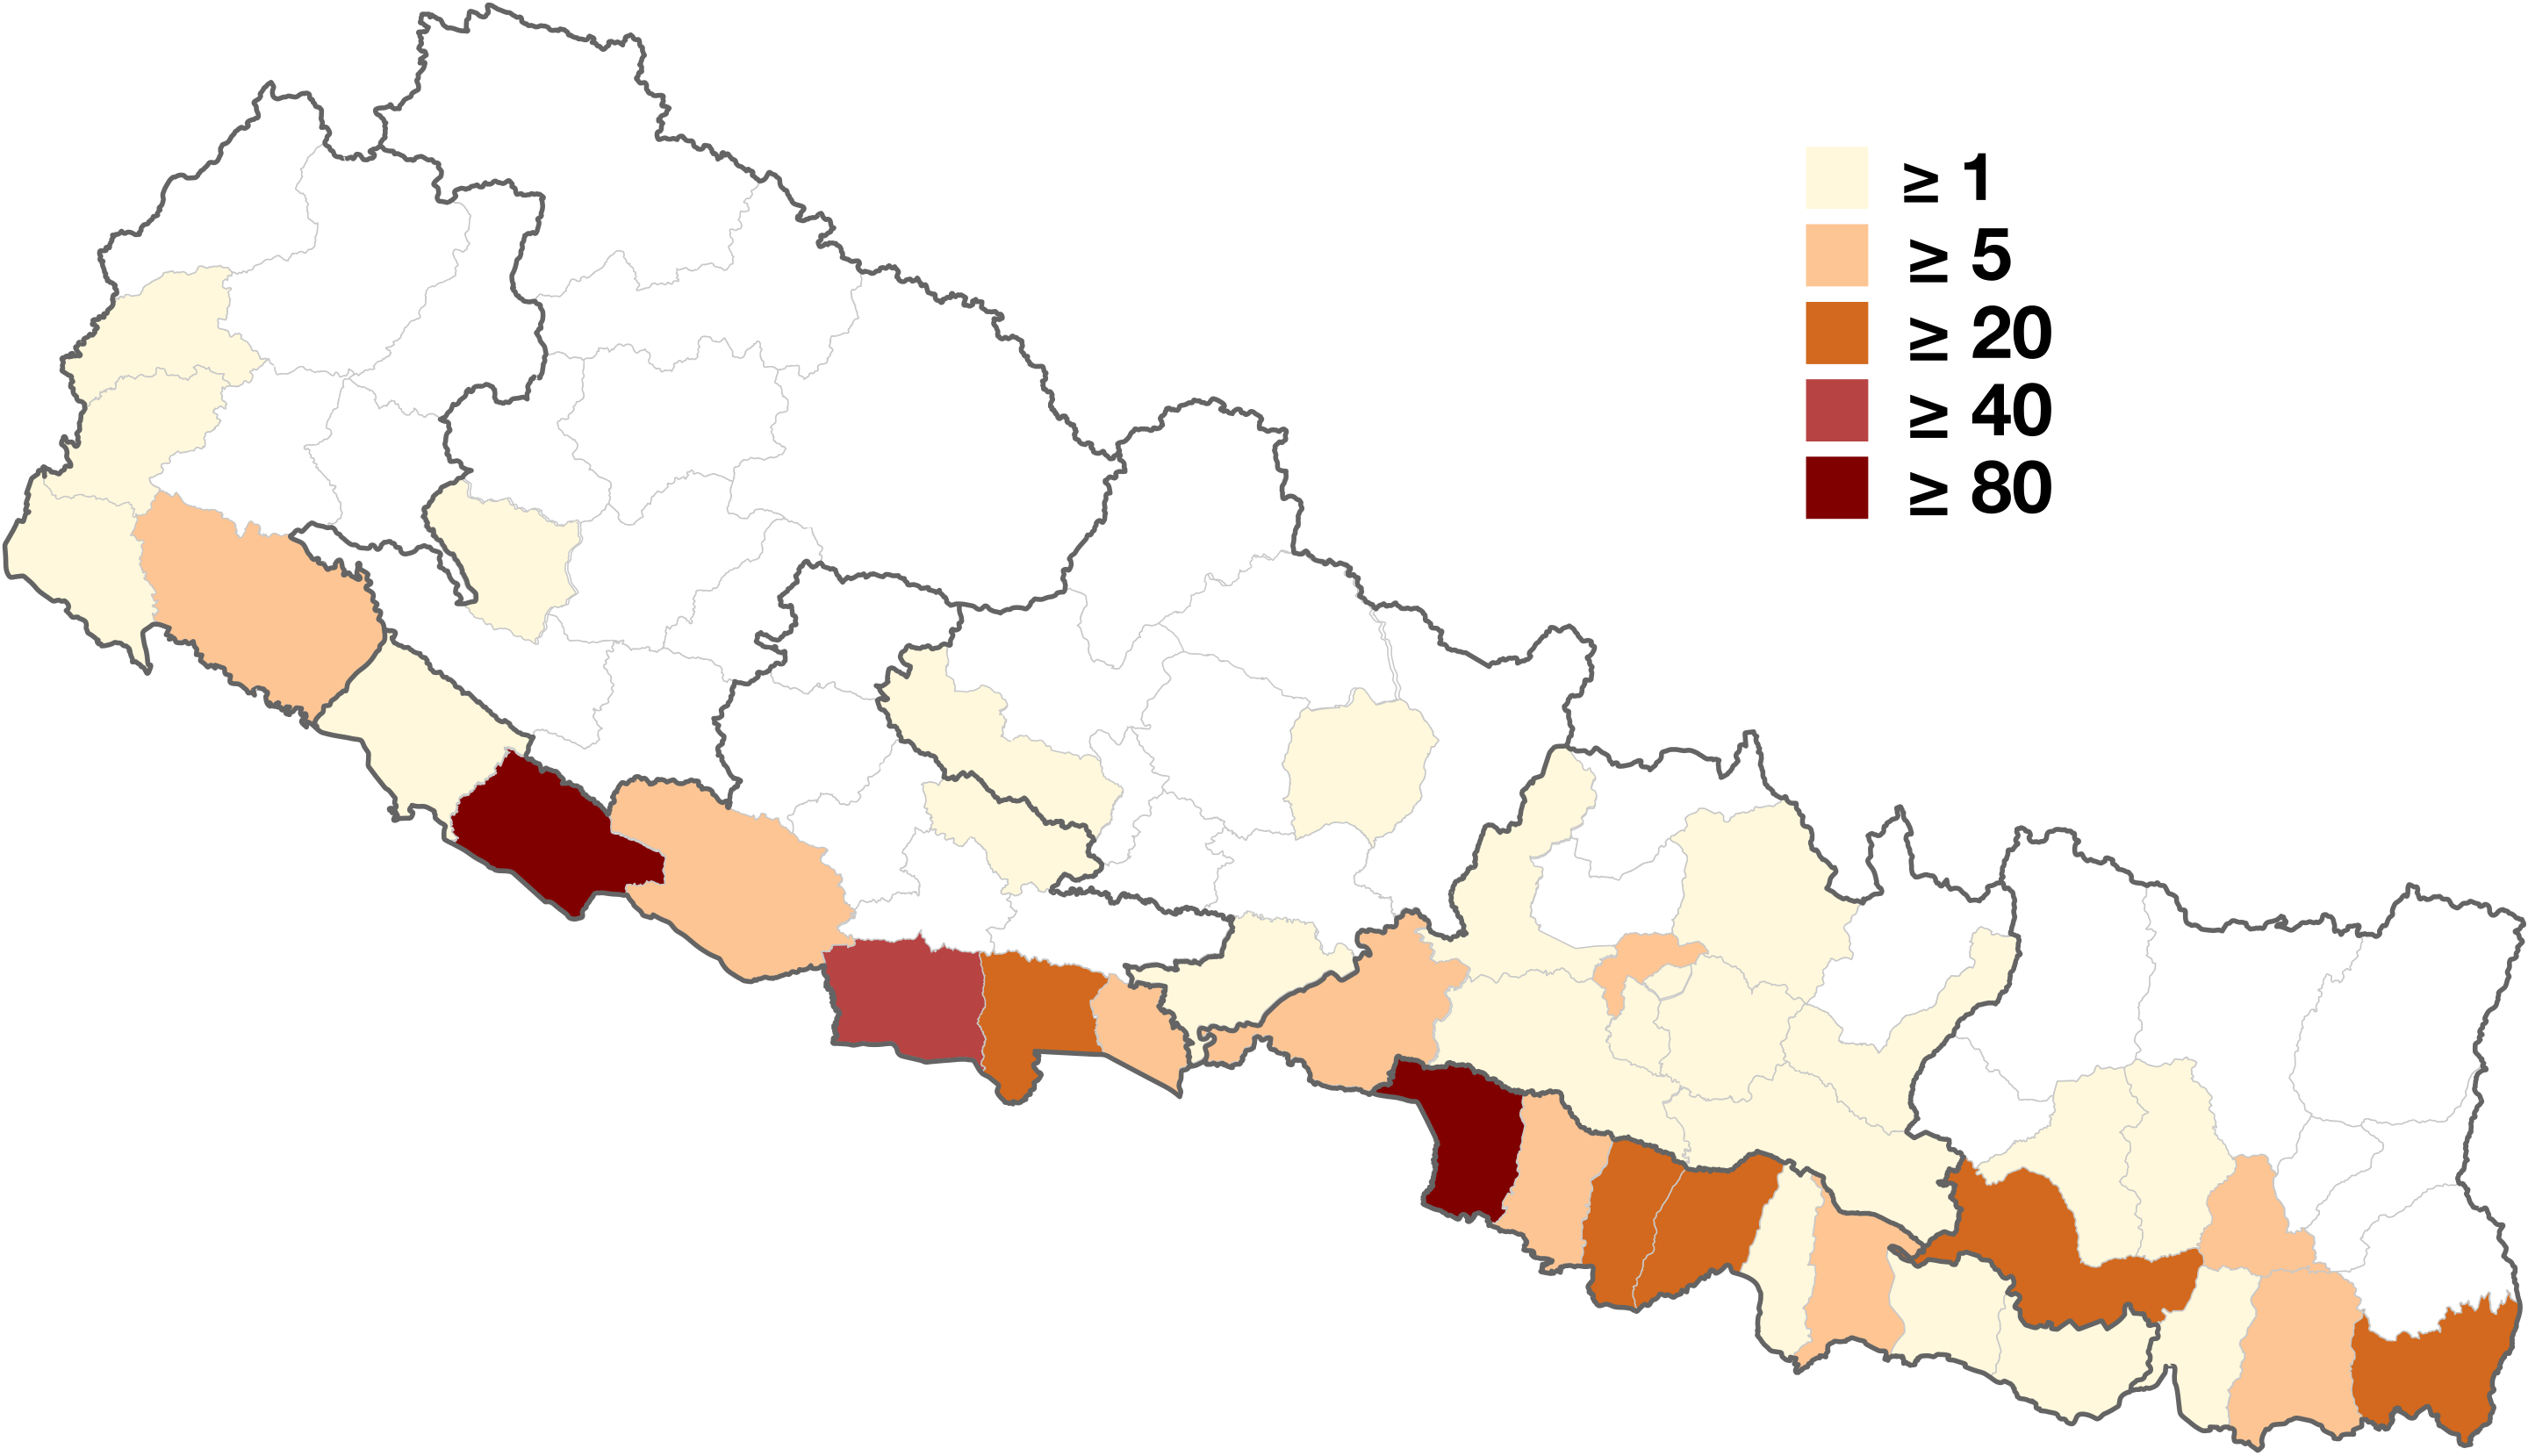 2880px-Nepal_COVID-19_outbreak_map_(Updated_22_May_2020).svg